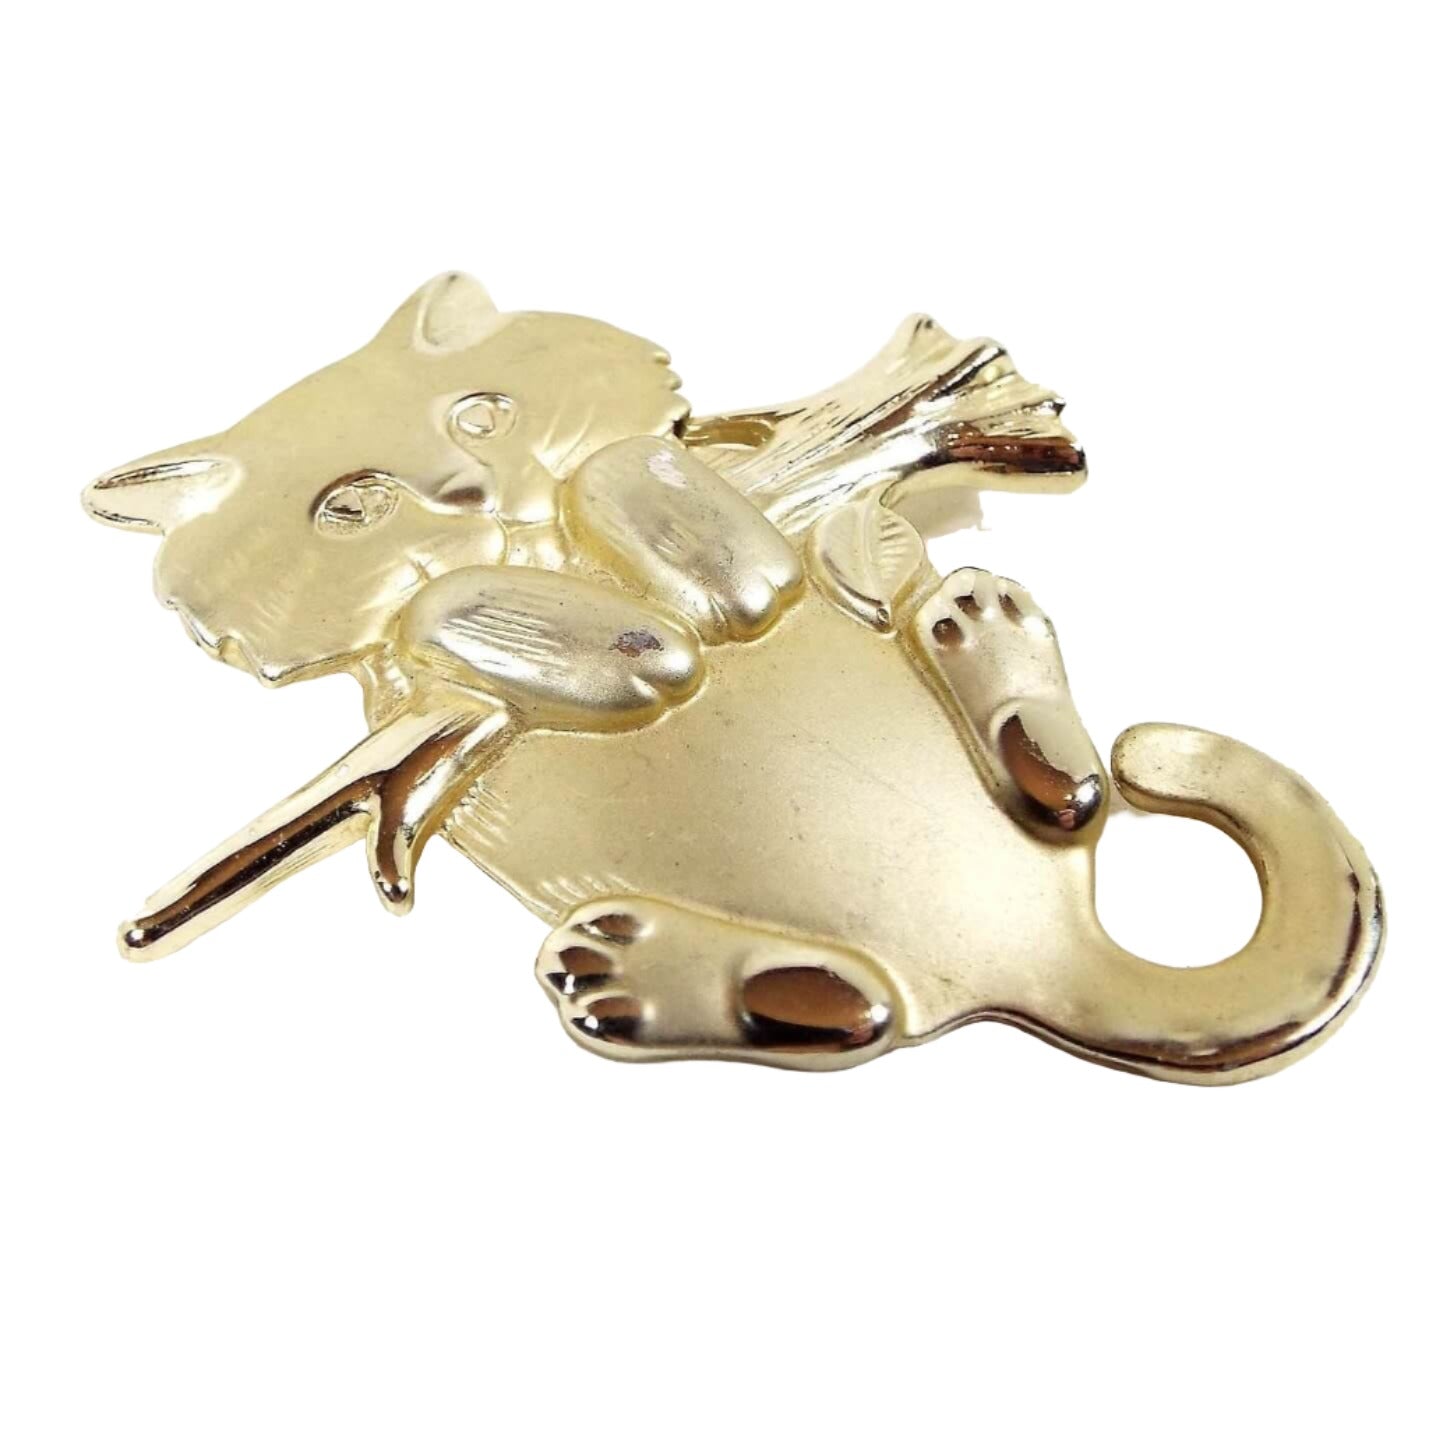 Brooch is gold in color. It has a young cat holding onto a branch facing forward. Most of the cat is matte gold in color, while the branch and toe pads on the cat are shiny gold color. Design is raised and slightly 3d in style. 